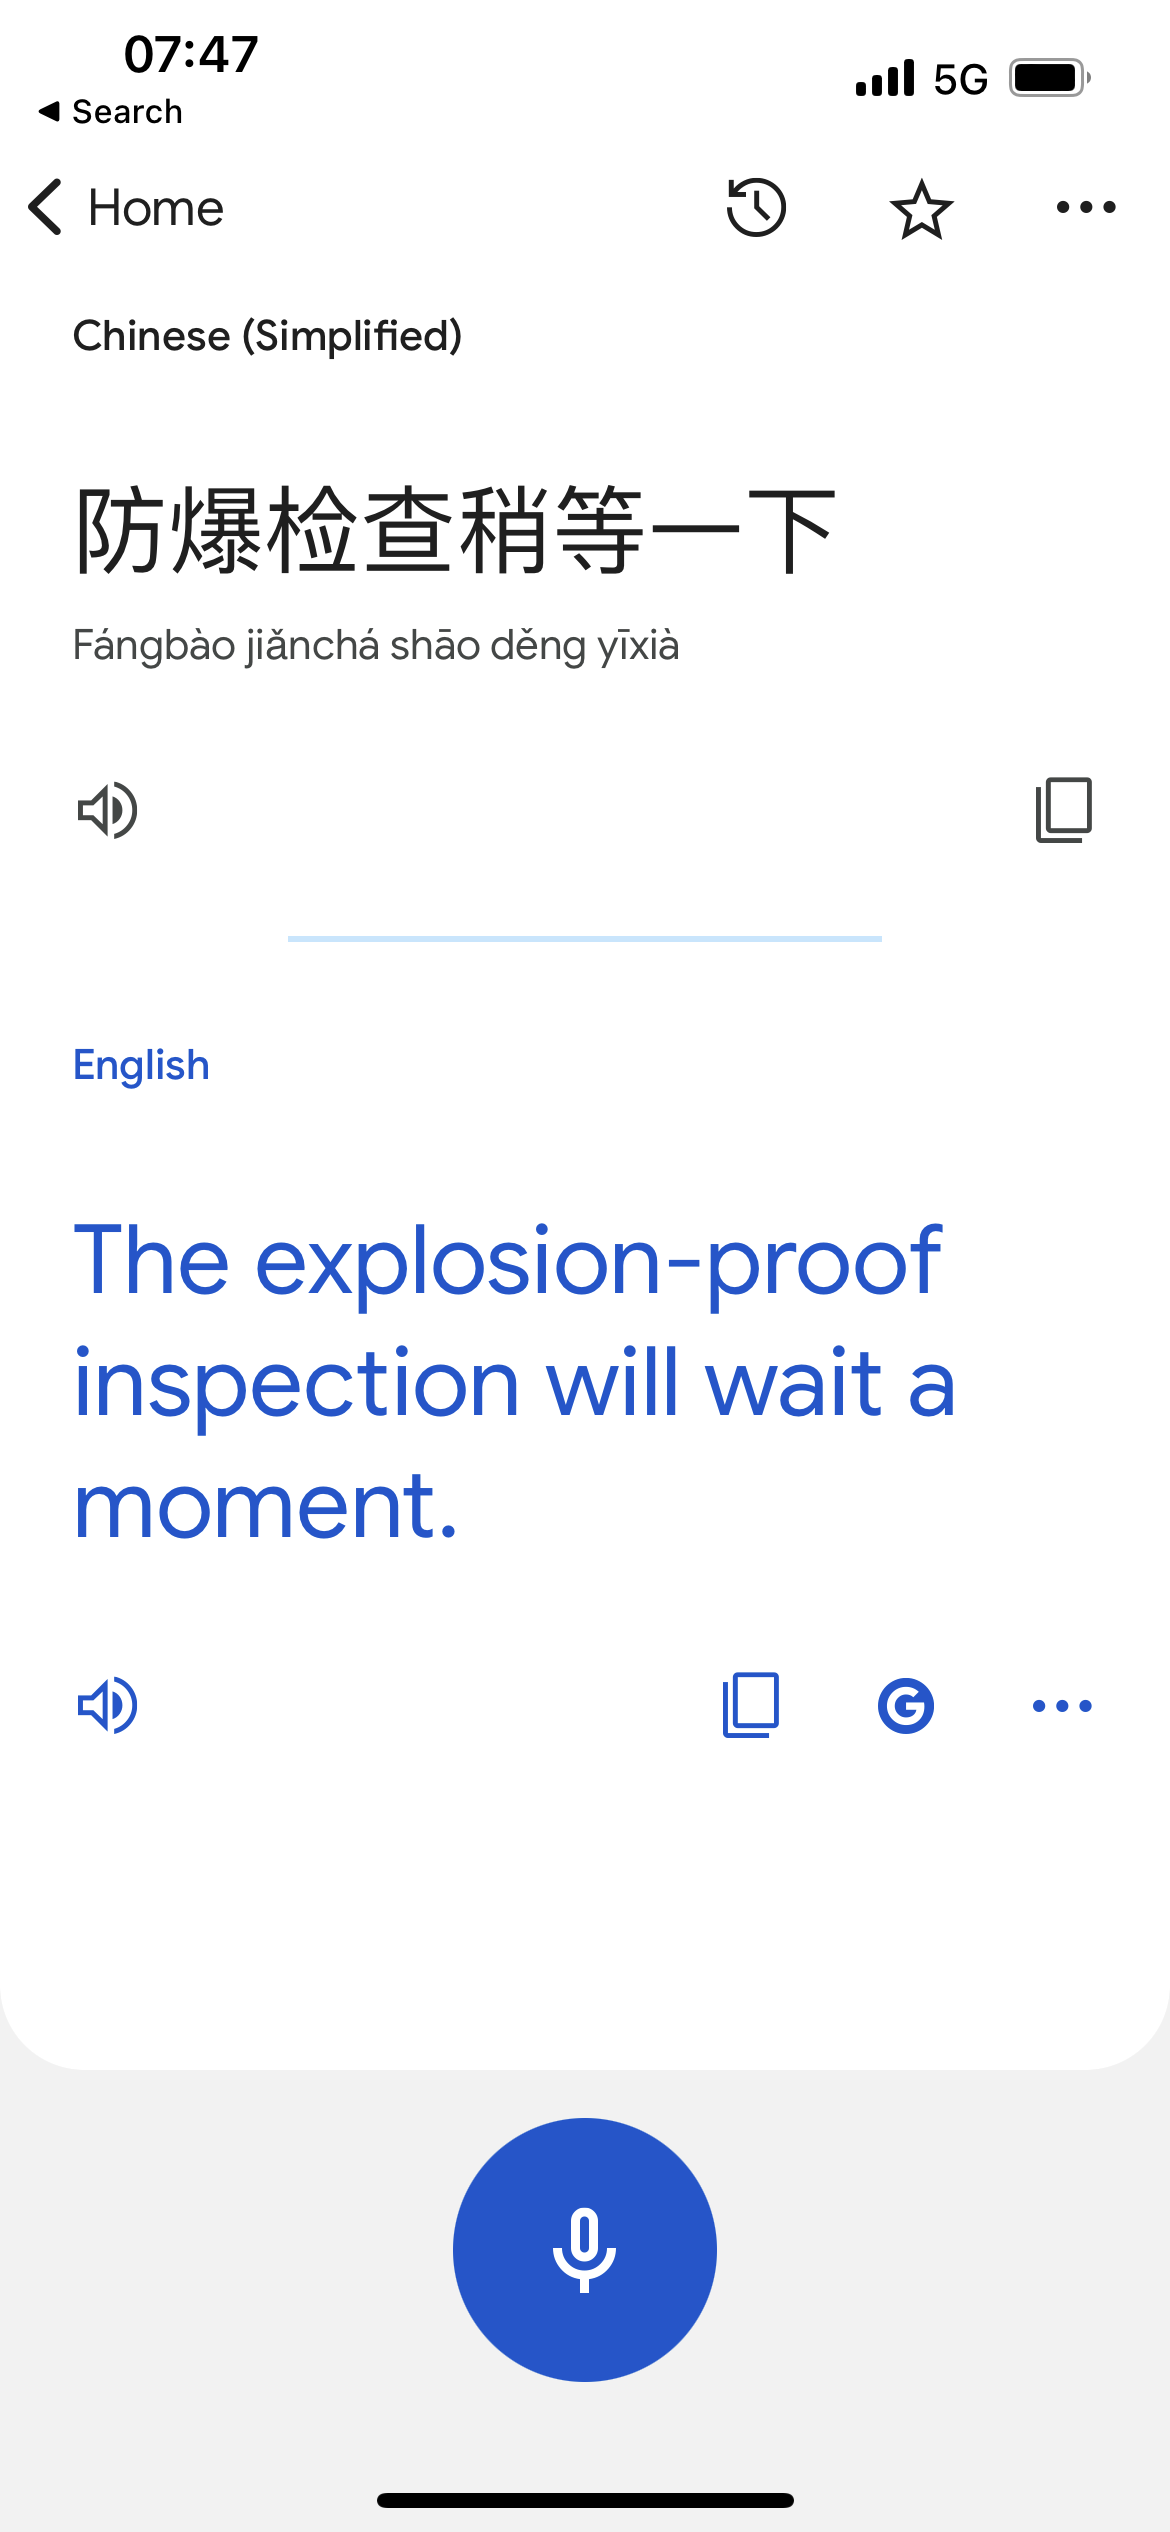 A Google Translate page showing the text: "The explosion-proof inspection will wait a moment."